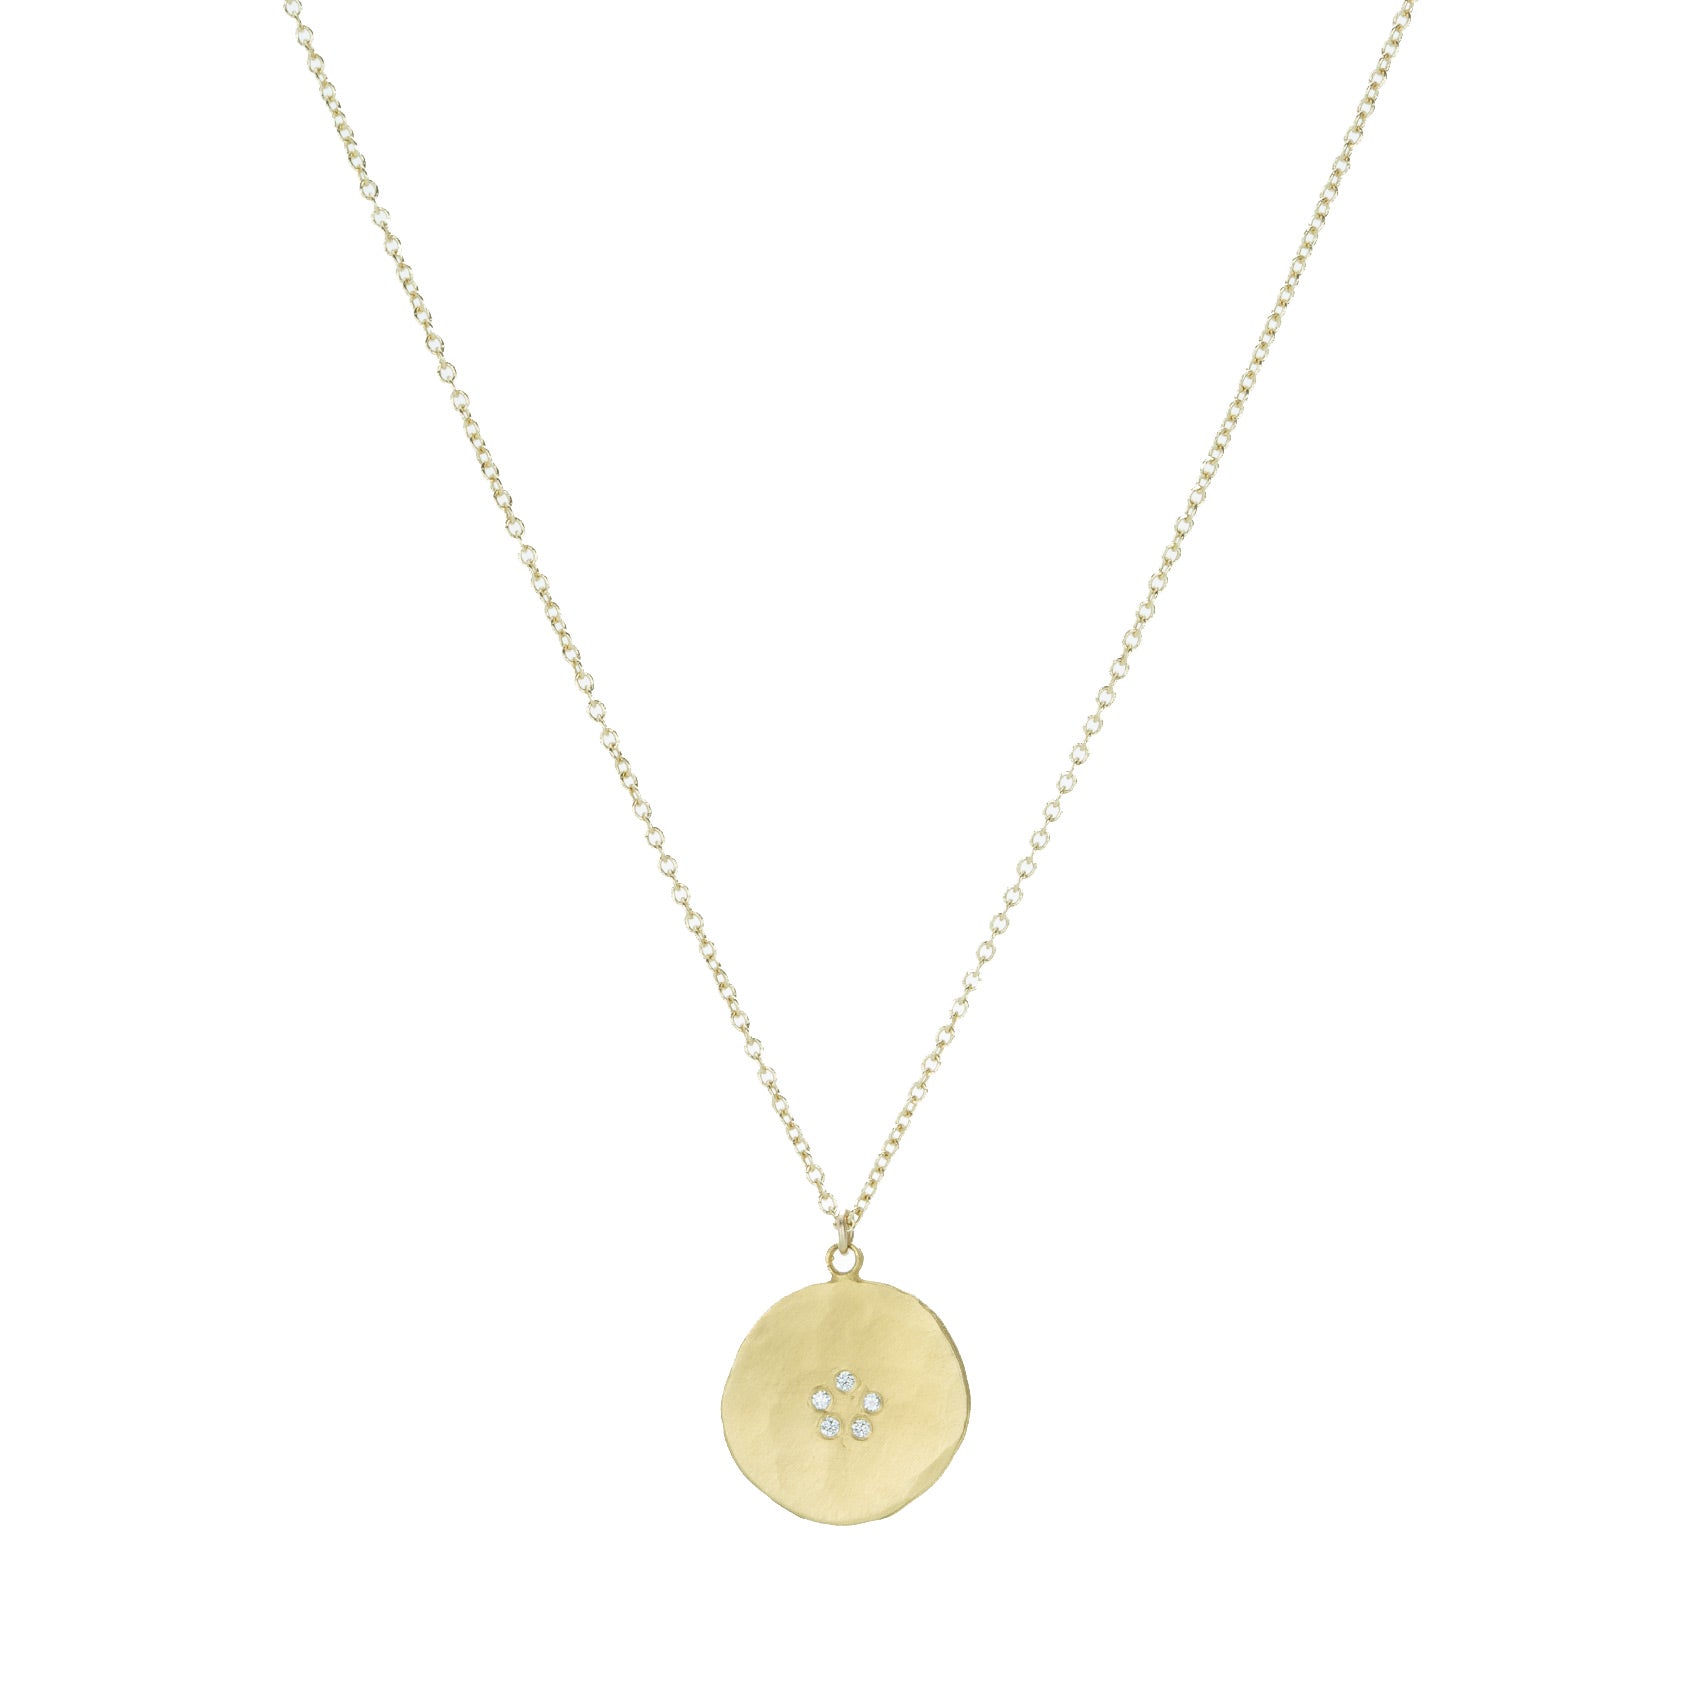 Rose Gold Plated Medium Hammered Disc Necklace | Posh Totty Designs | Wolf  & Badger